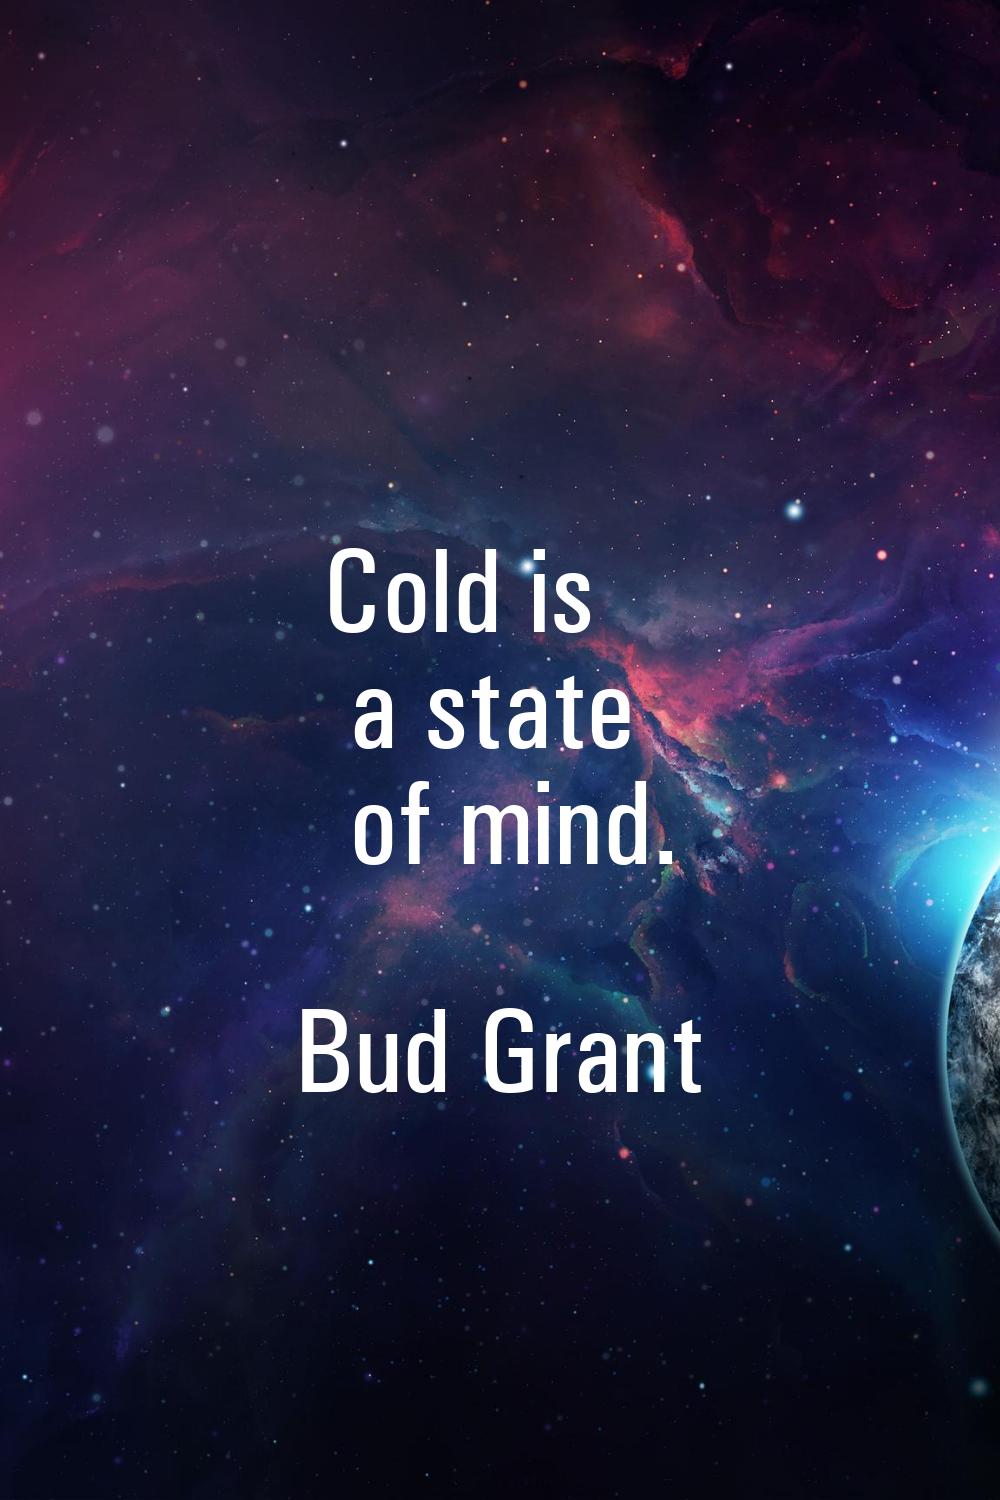 Cold is a state of mind.